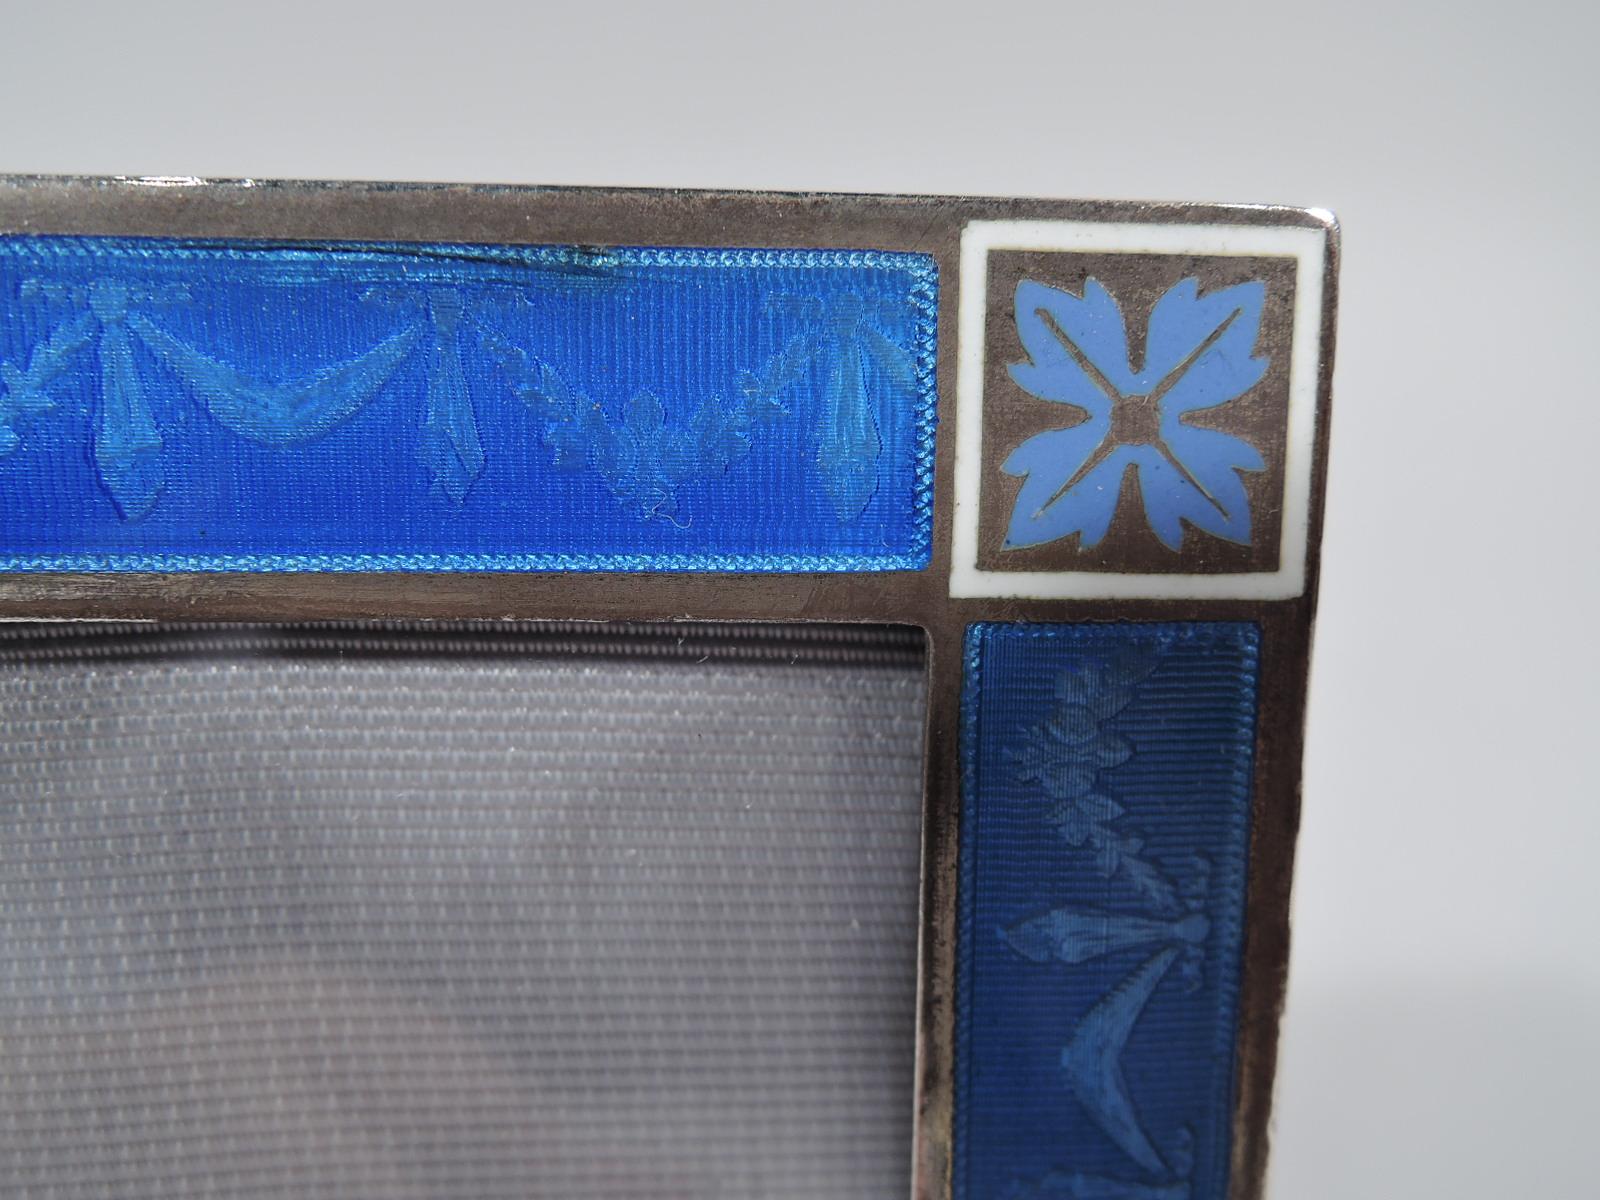 Edwardian Regency silver and enamel picture frame, ca 1910. Rectangular window with flat surround. Bow-tied floral garland on blue lined ground. Corner squares have white borders and are inset with violet paterae. With glass, silk lining, and velvet